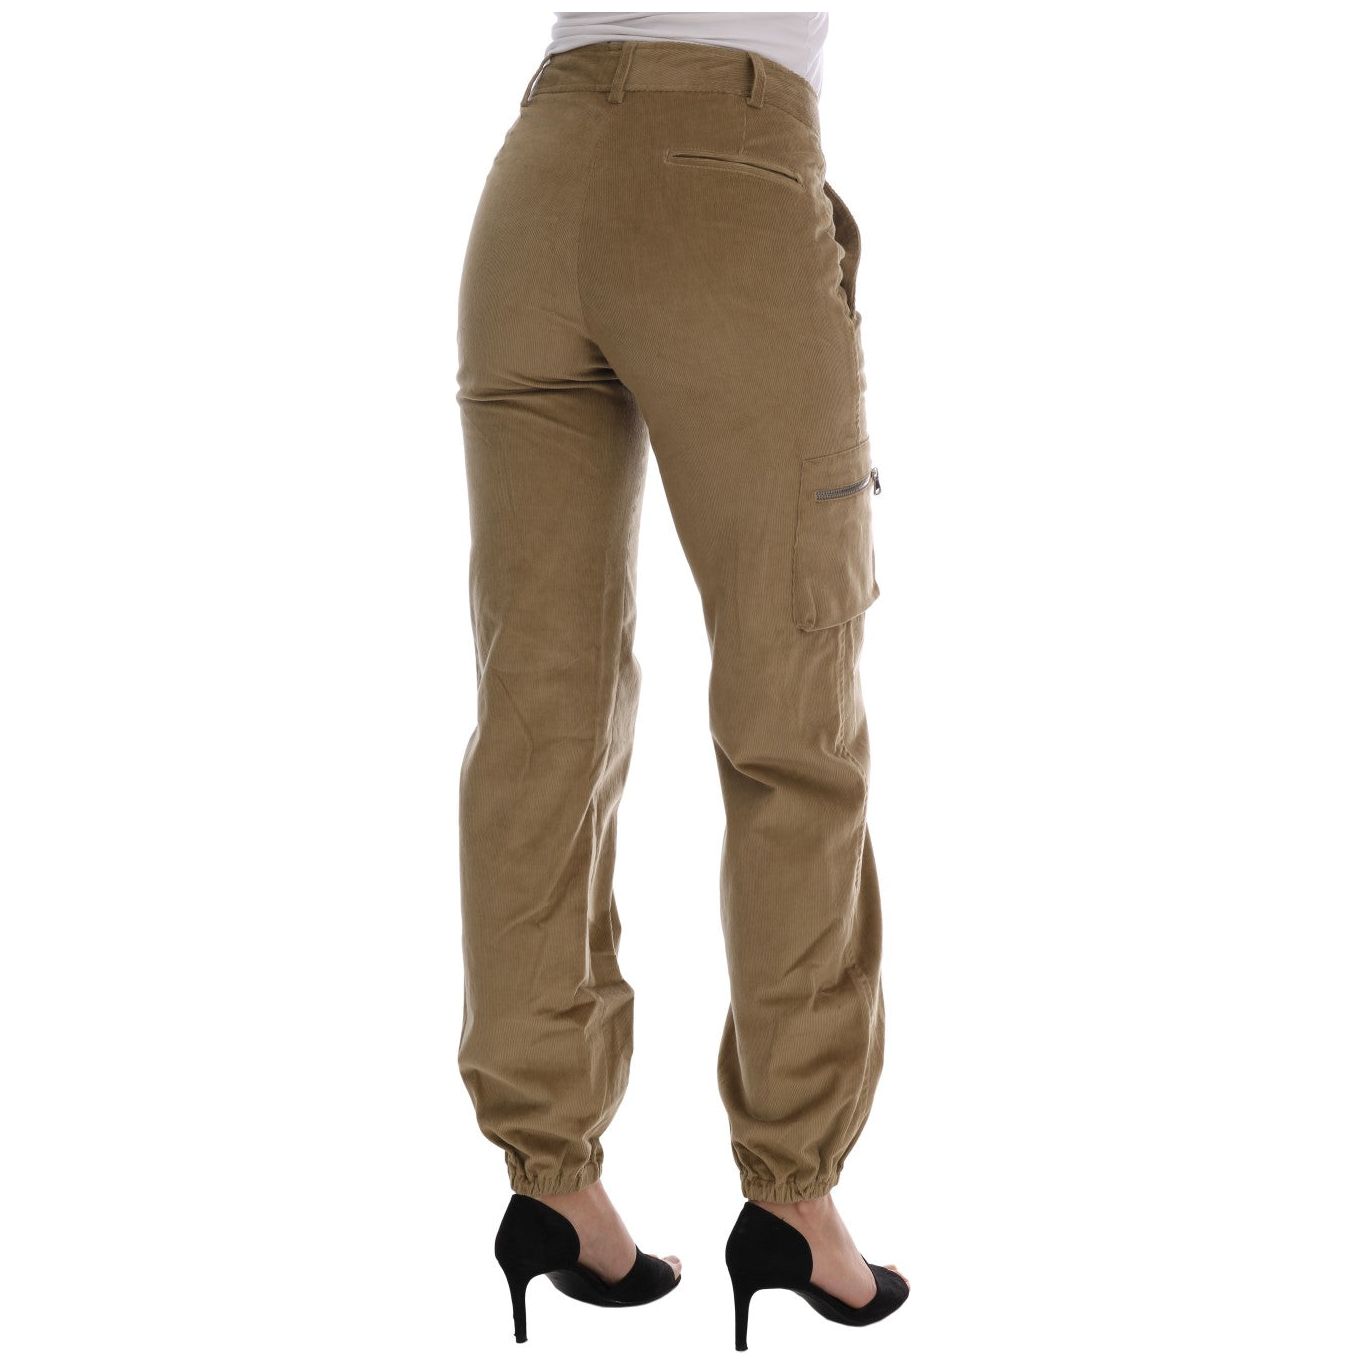 Ermanno Scervino Chic Beige Casual Pants for Sophisticated Style Jeans & Pants beige-cotton-corduroys-pants